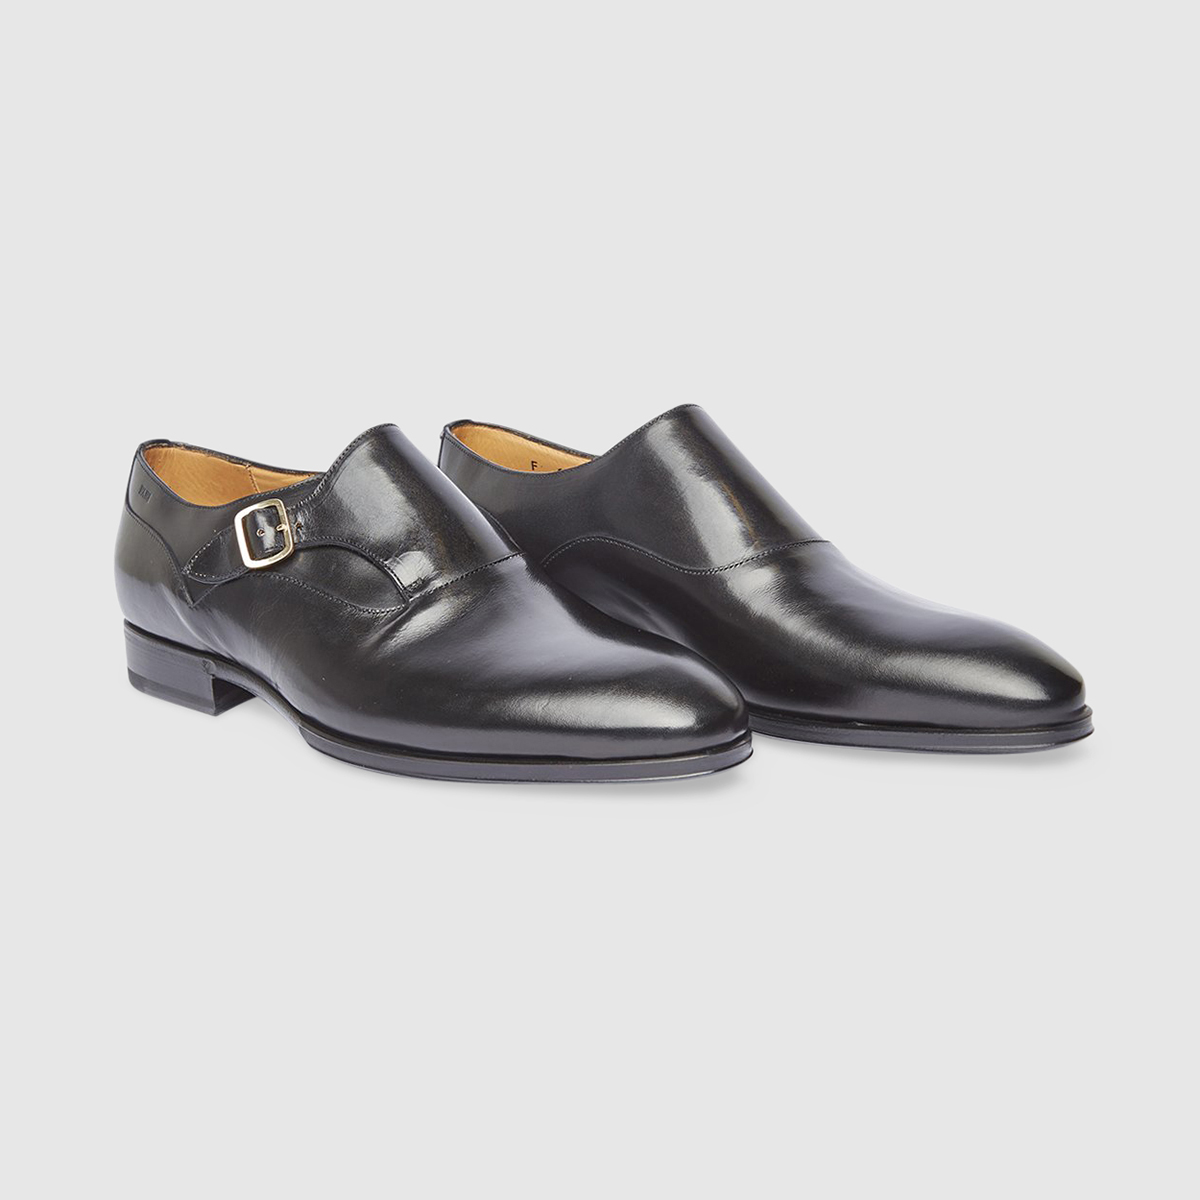 Monk Shoes Shoes in Calfskin Black Leather Gruppo Fabi on sale 2022 2